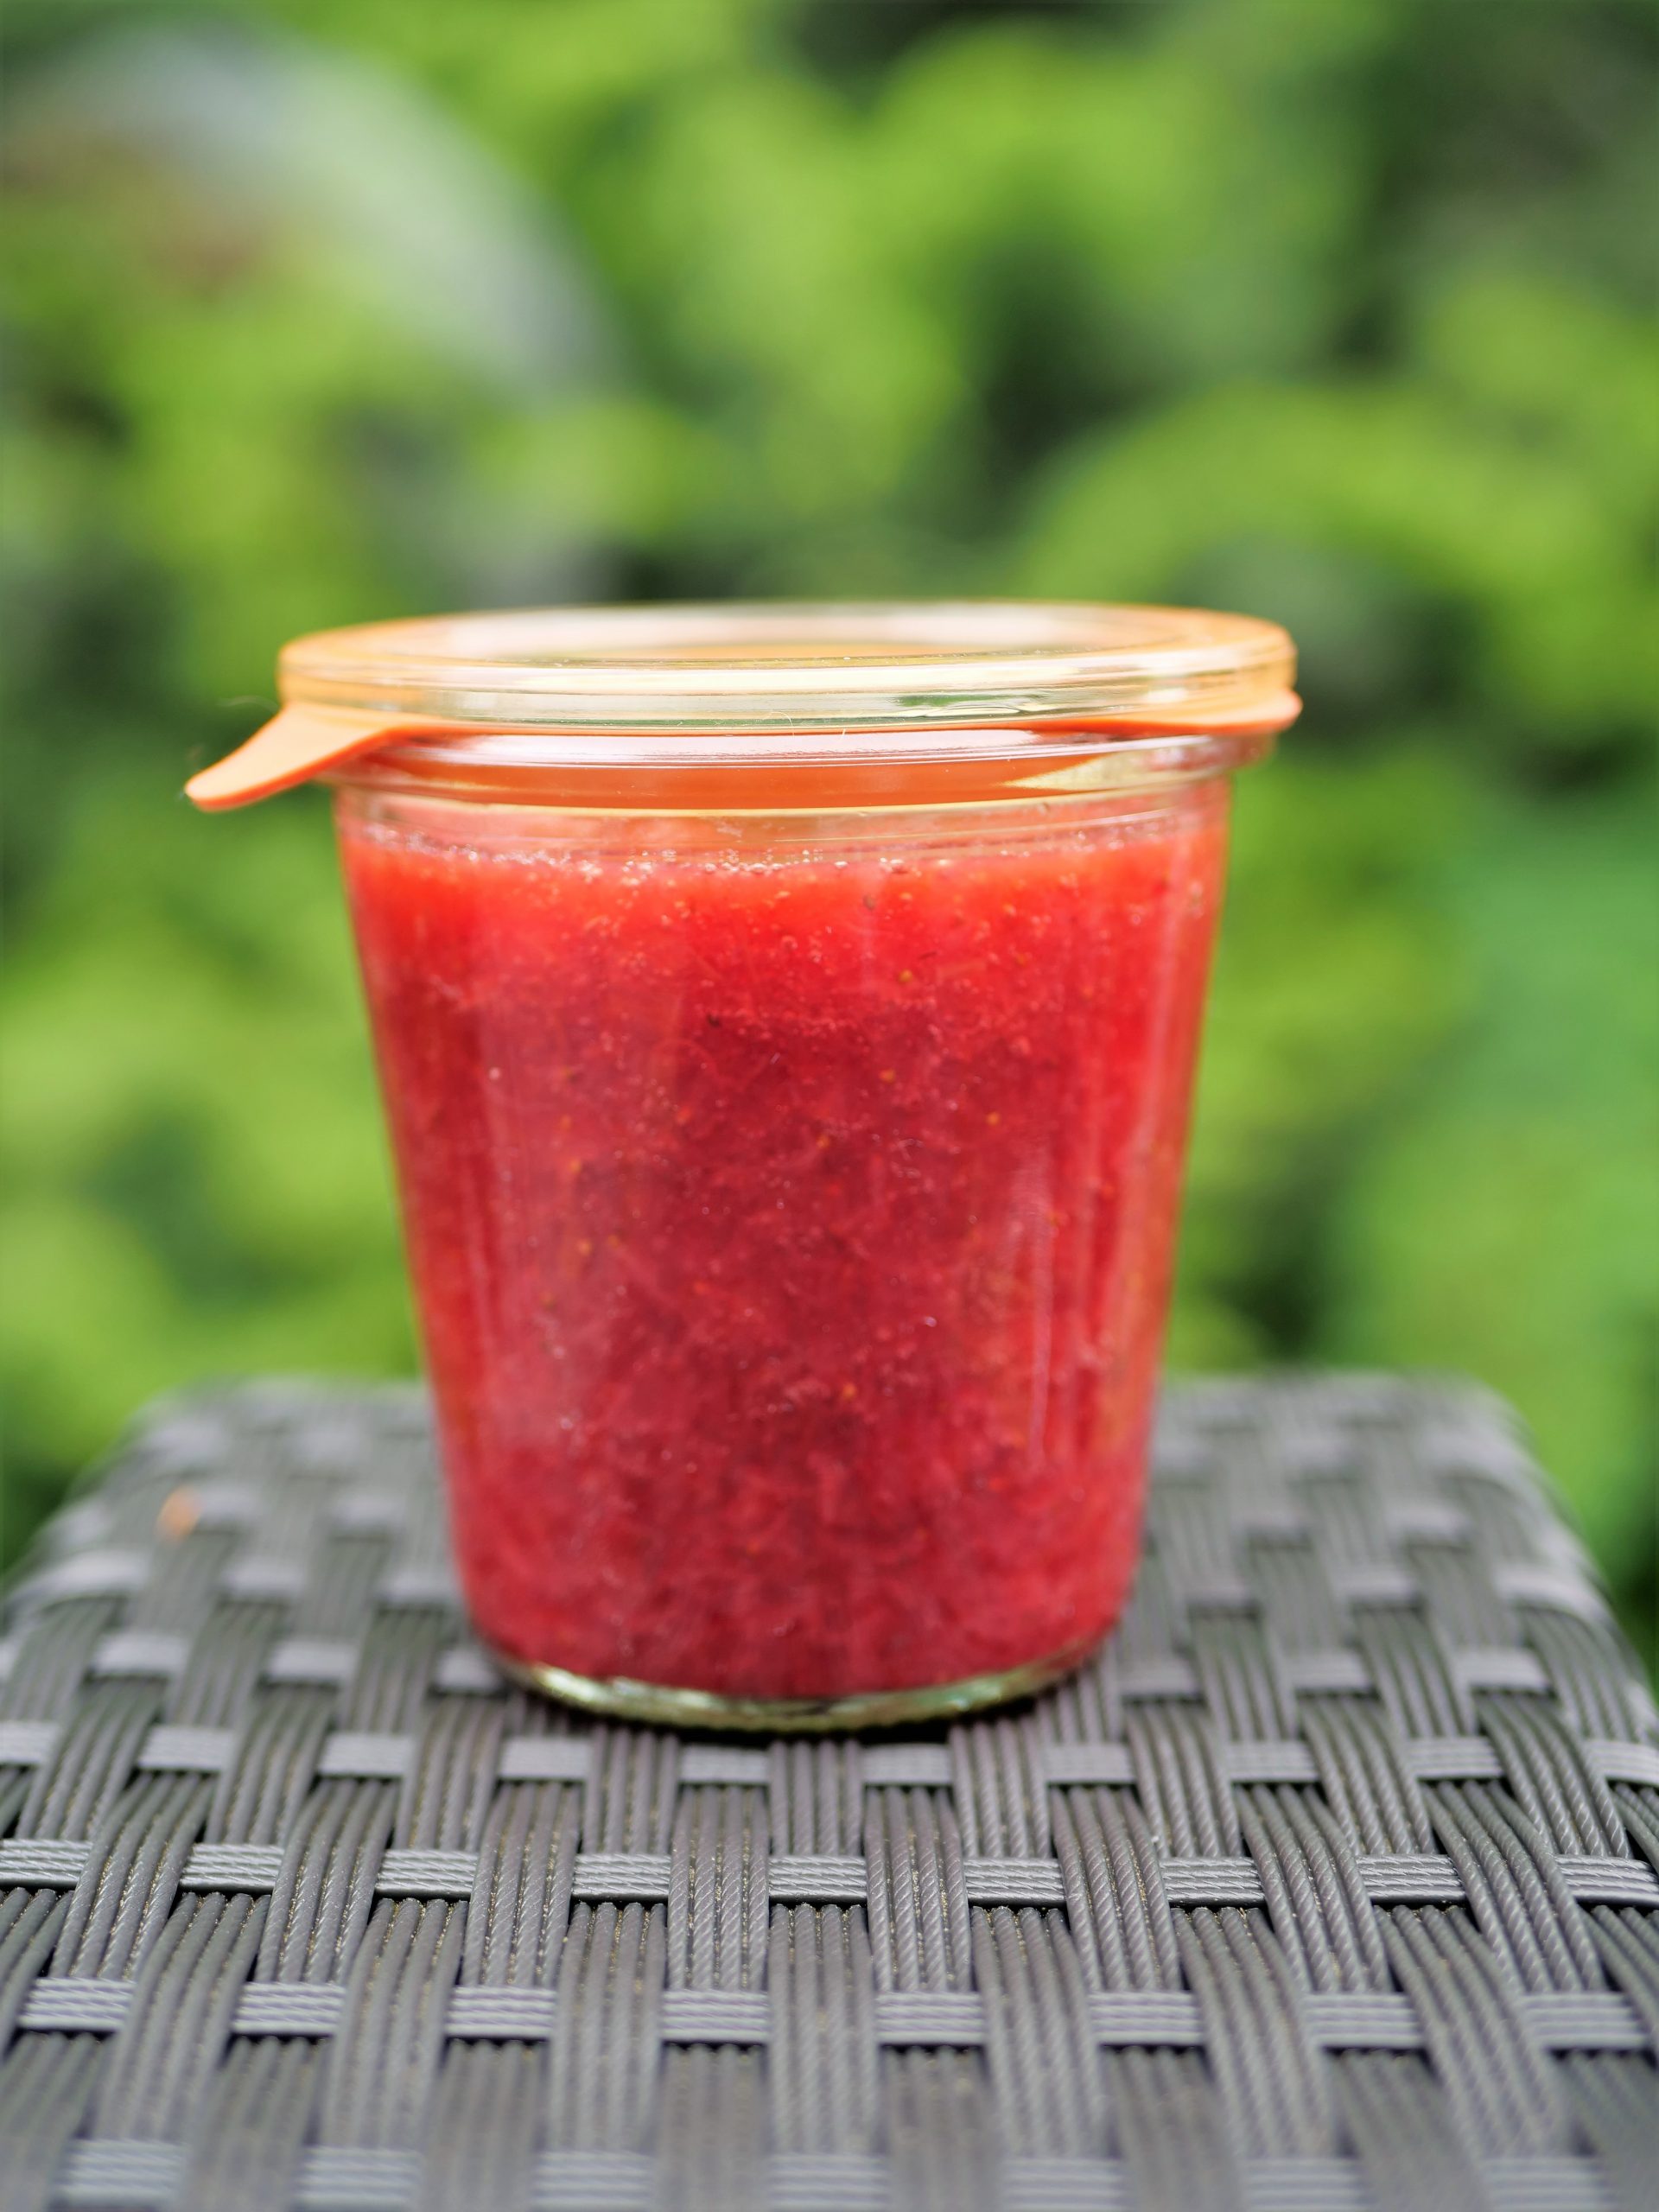 How To Make Low Sugar Strawberry Rhubarb Jam For Canning